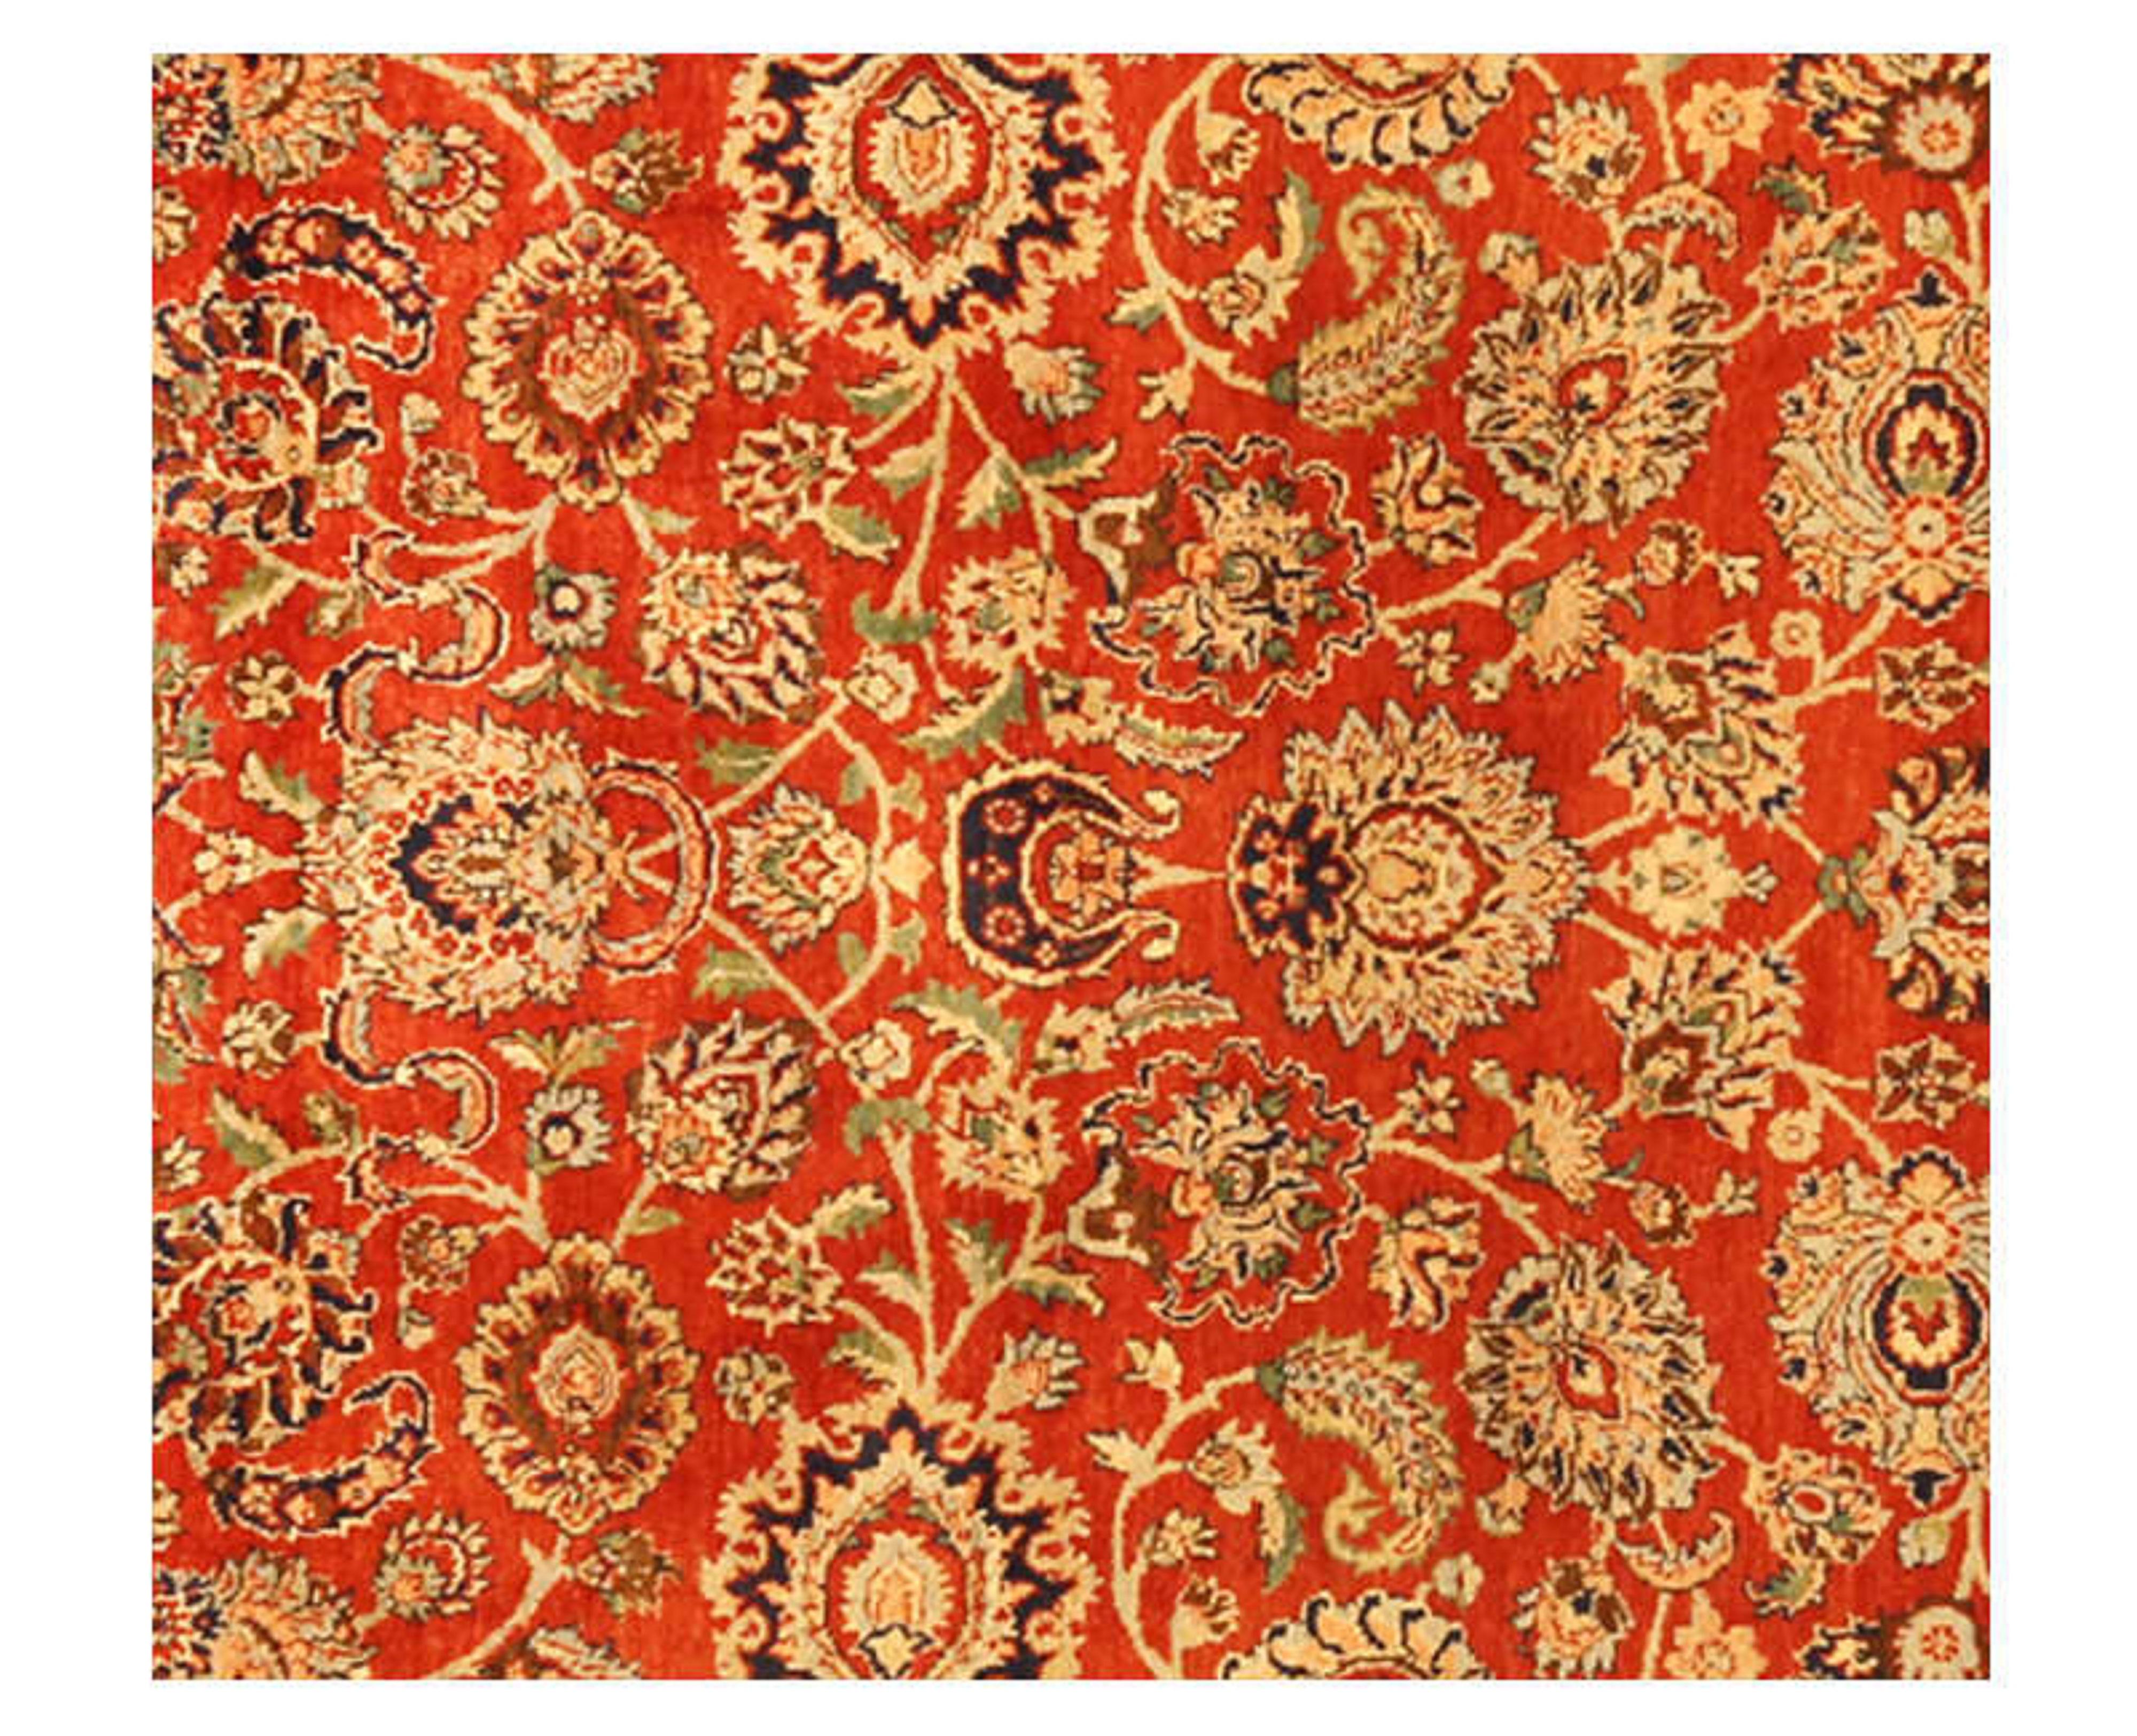 Traditional Hand-woven Persian Mashad Indo Rug from RenCollection Rugs – Traditional antique hand-woven Persian Mashad rug features an intricately rendered allover floral design on a striking rust-colored field which is enclosed with a beautifully